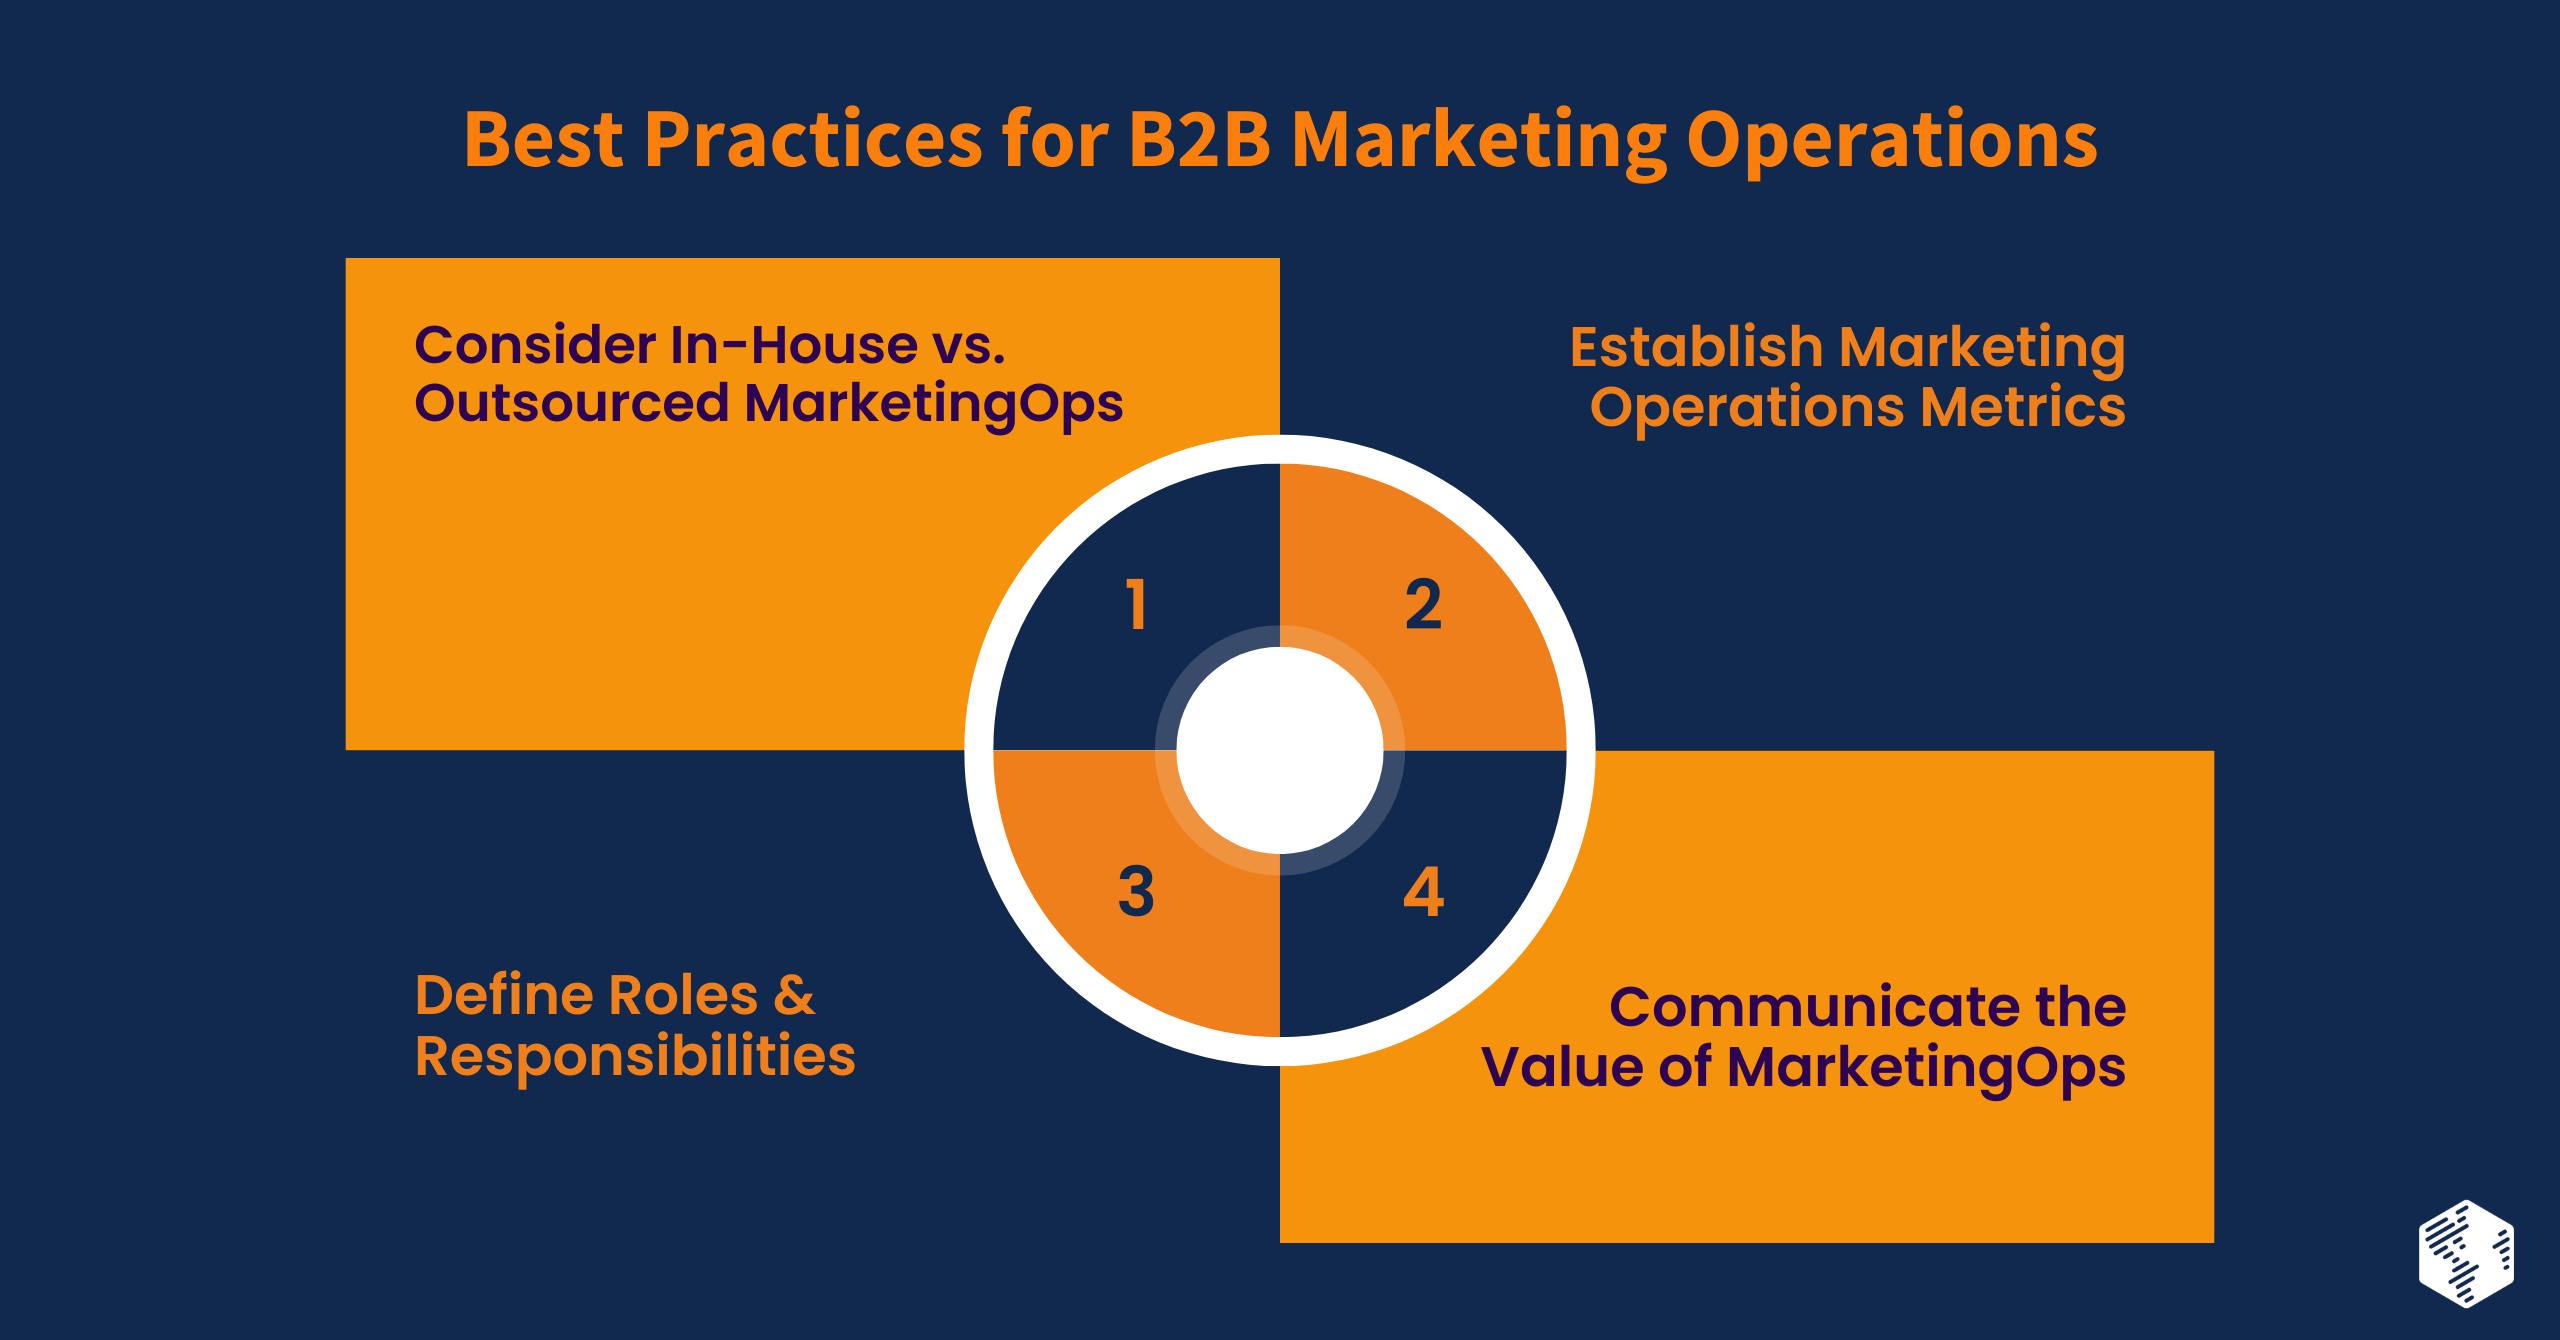 Best Practices for B2B Marketing Operations